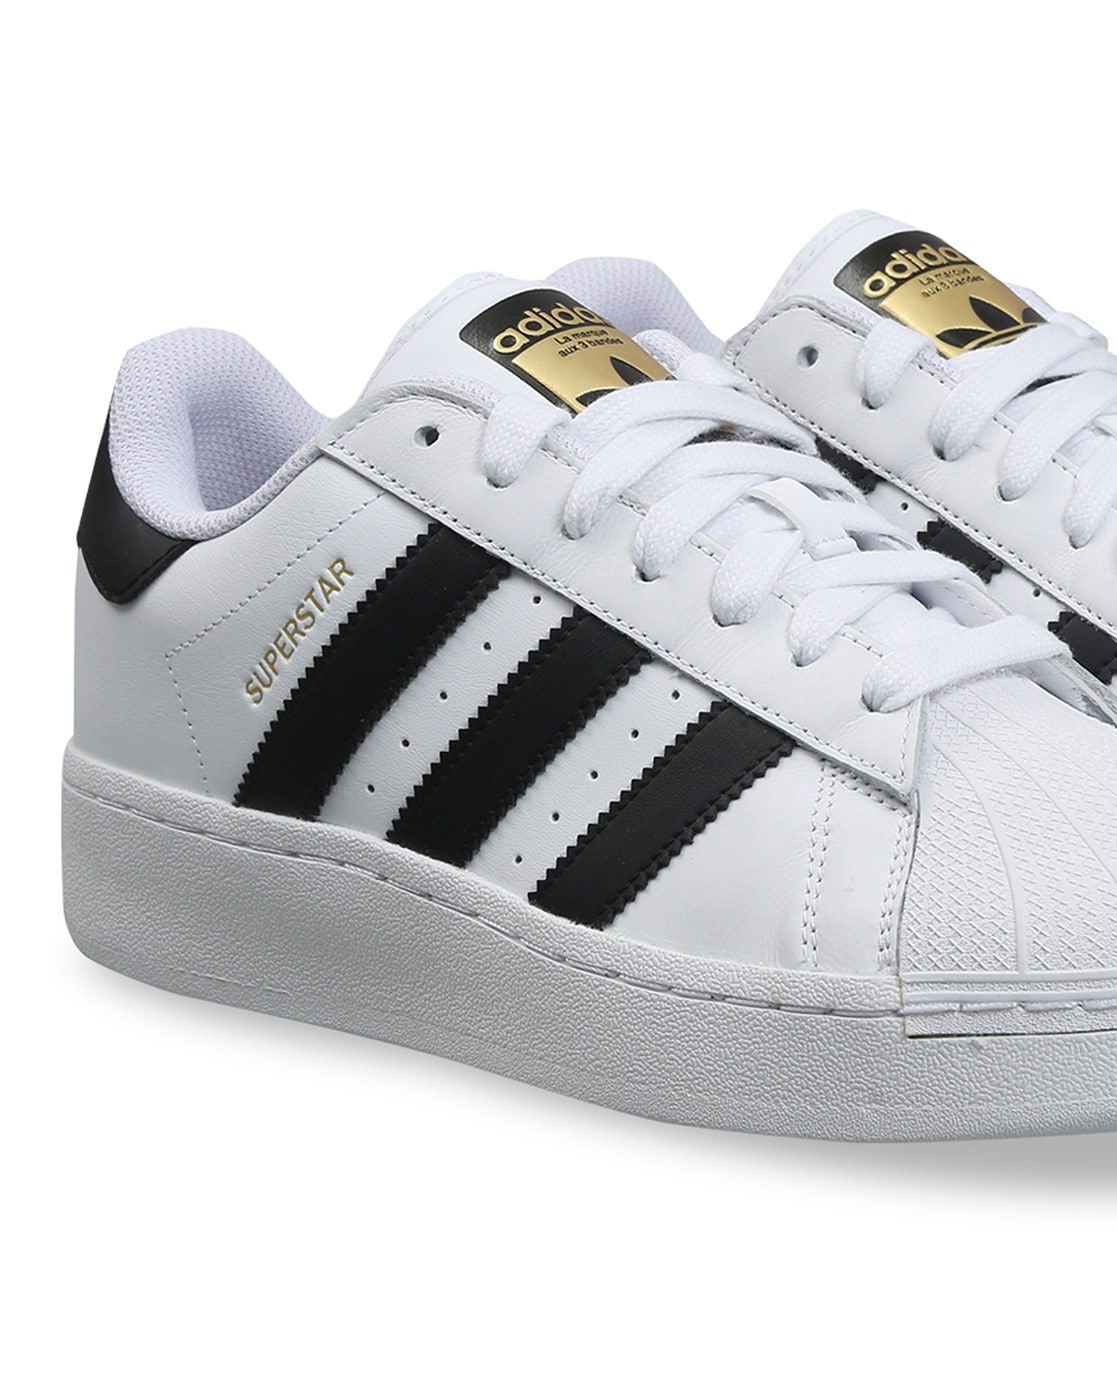 adidas Originals Superstar XLG trainers in white and blue